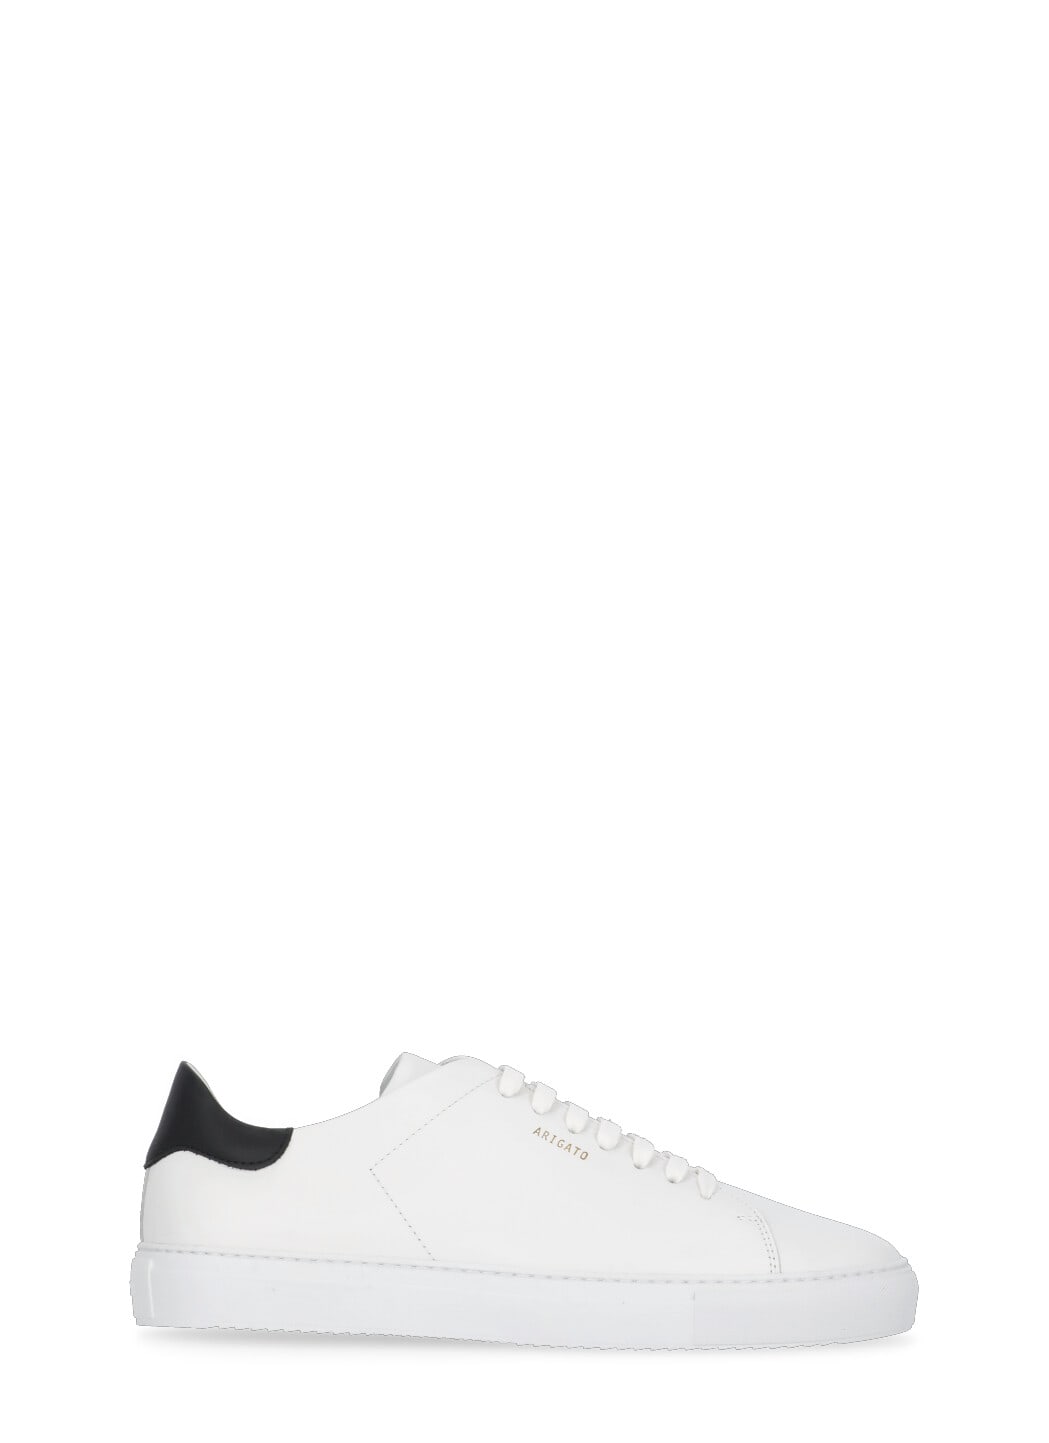 AXEL ARIGATO CLEAN 90 CONTRAST trainers